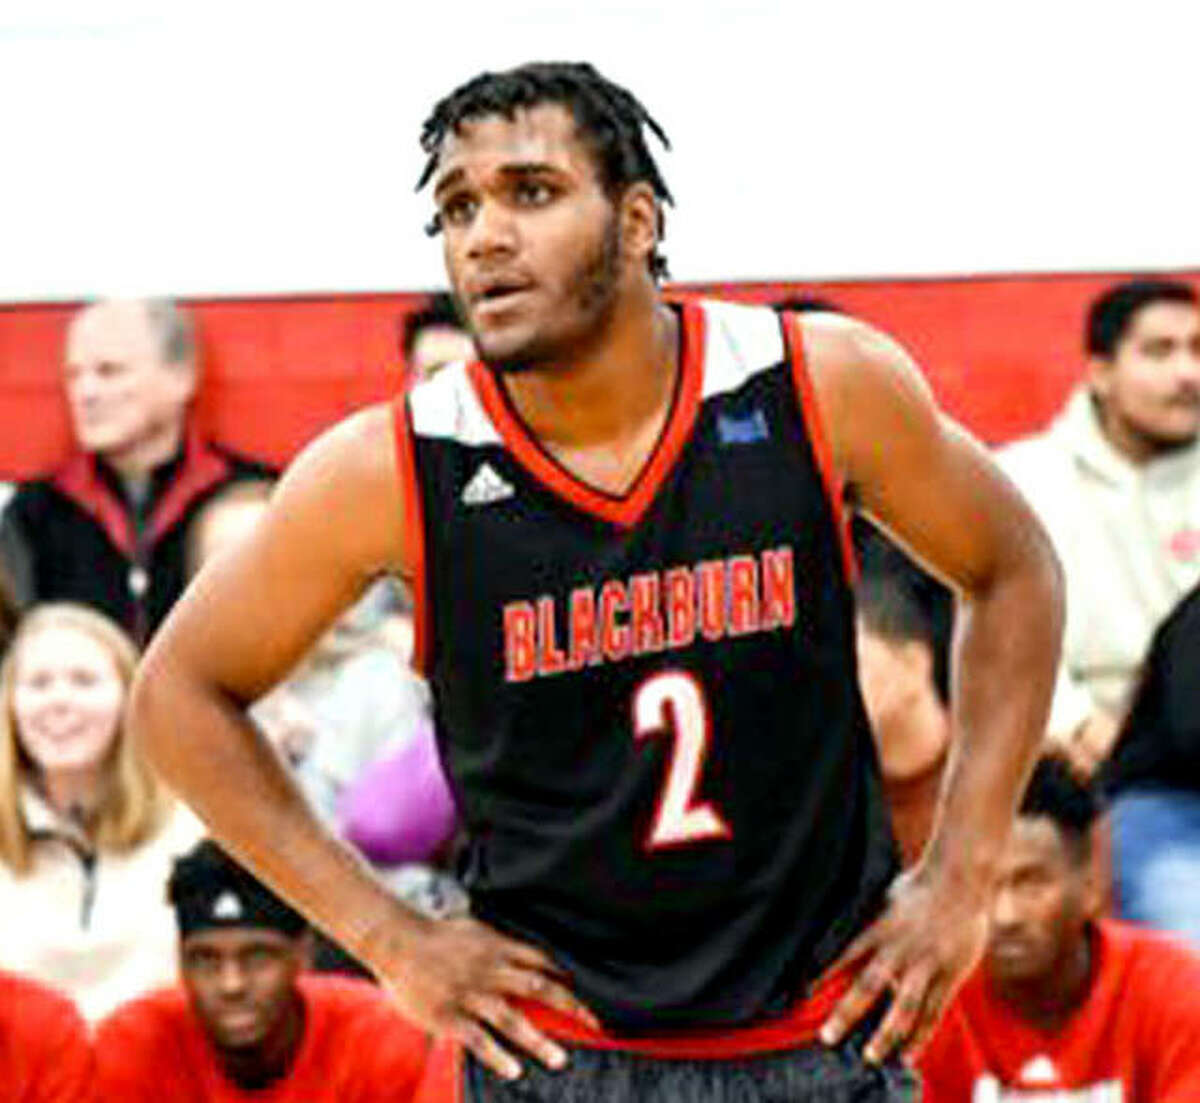 Karson Hayes of Blackburn College was named to the SLIAC 2010-2019 All-Decade Team. Hayes was the fourth Beaver in program history to earn three All-Conference selections. He was a first team choice in each of his final two seasons and helped the Beavers to three consecutive SLIAC Tournament trips.